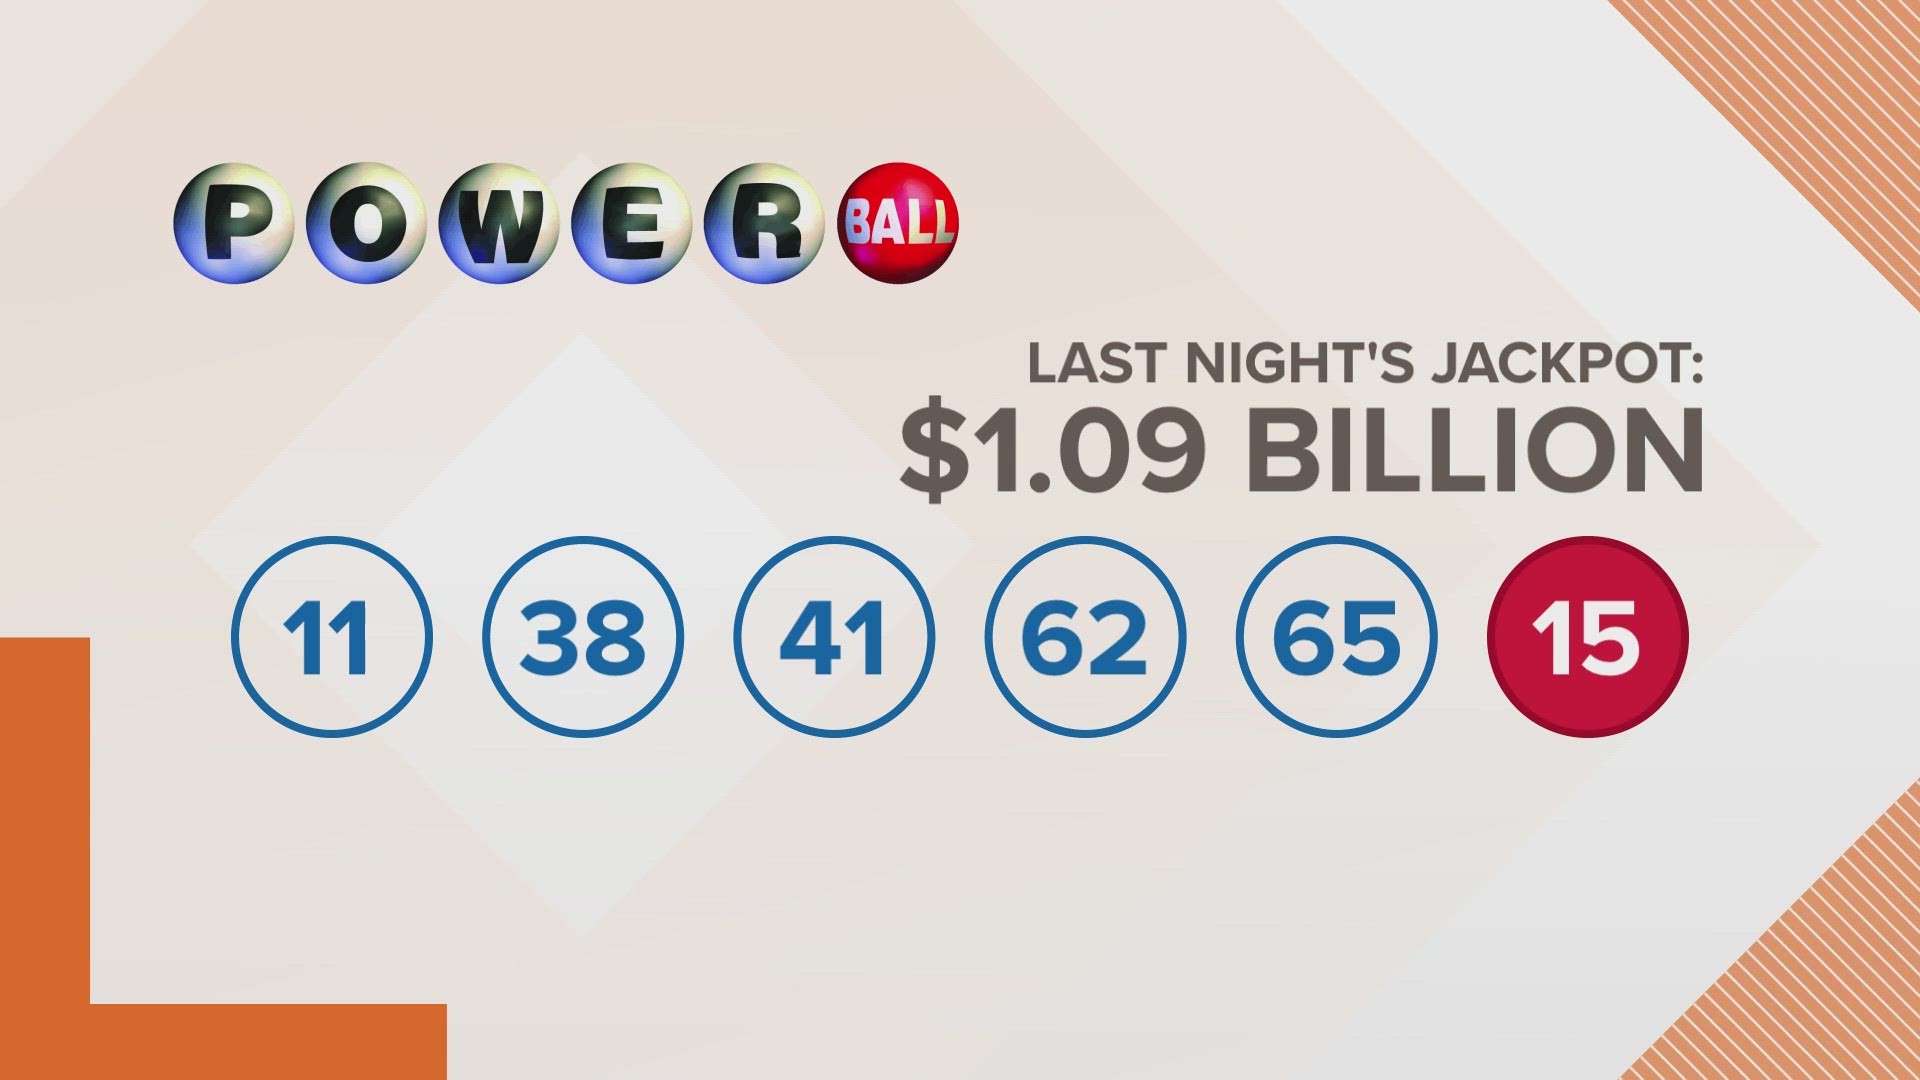 The jackpot is now up to $1.23 billion.